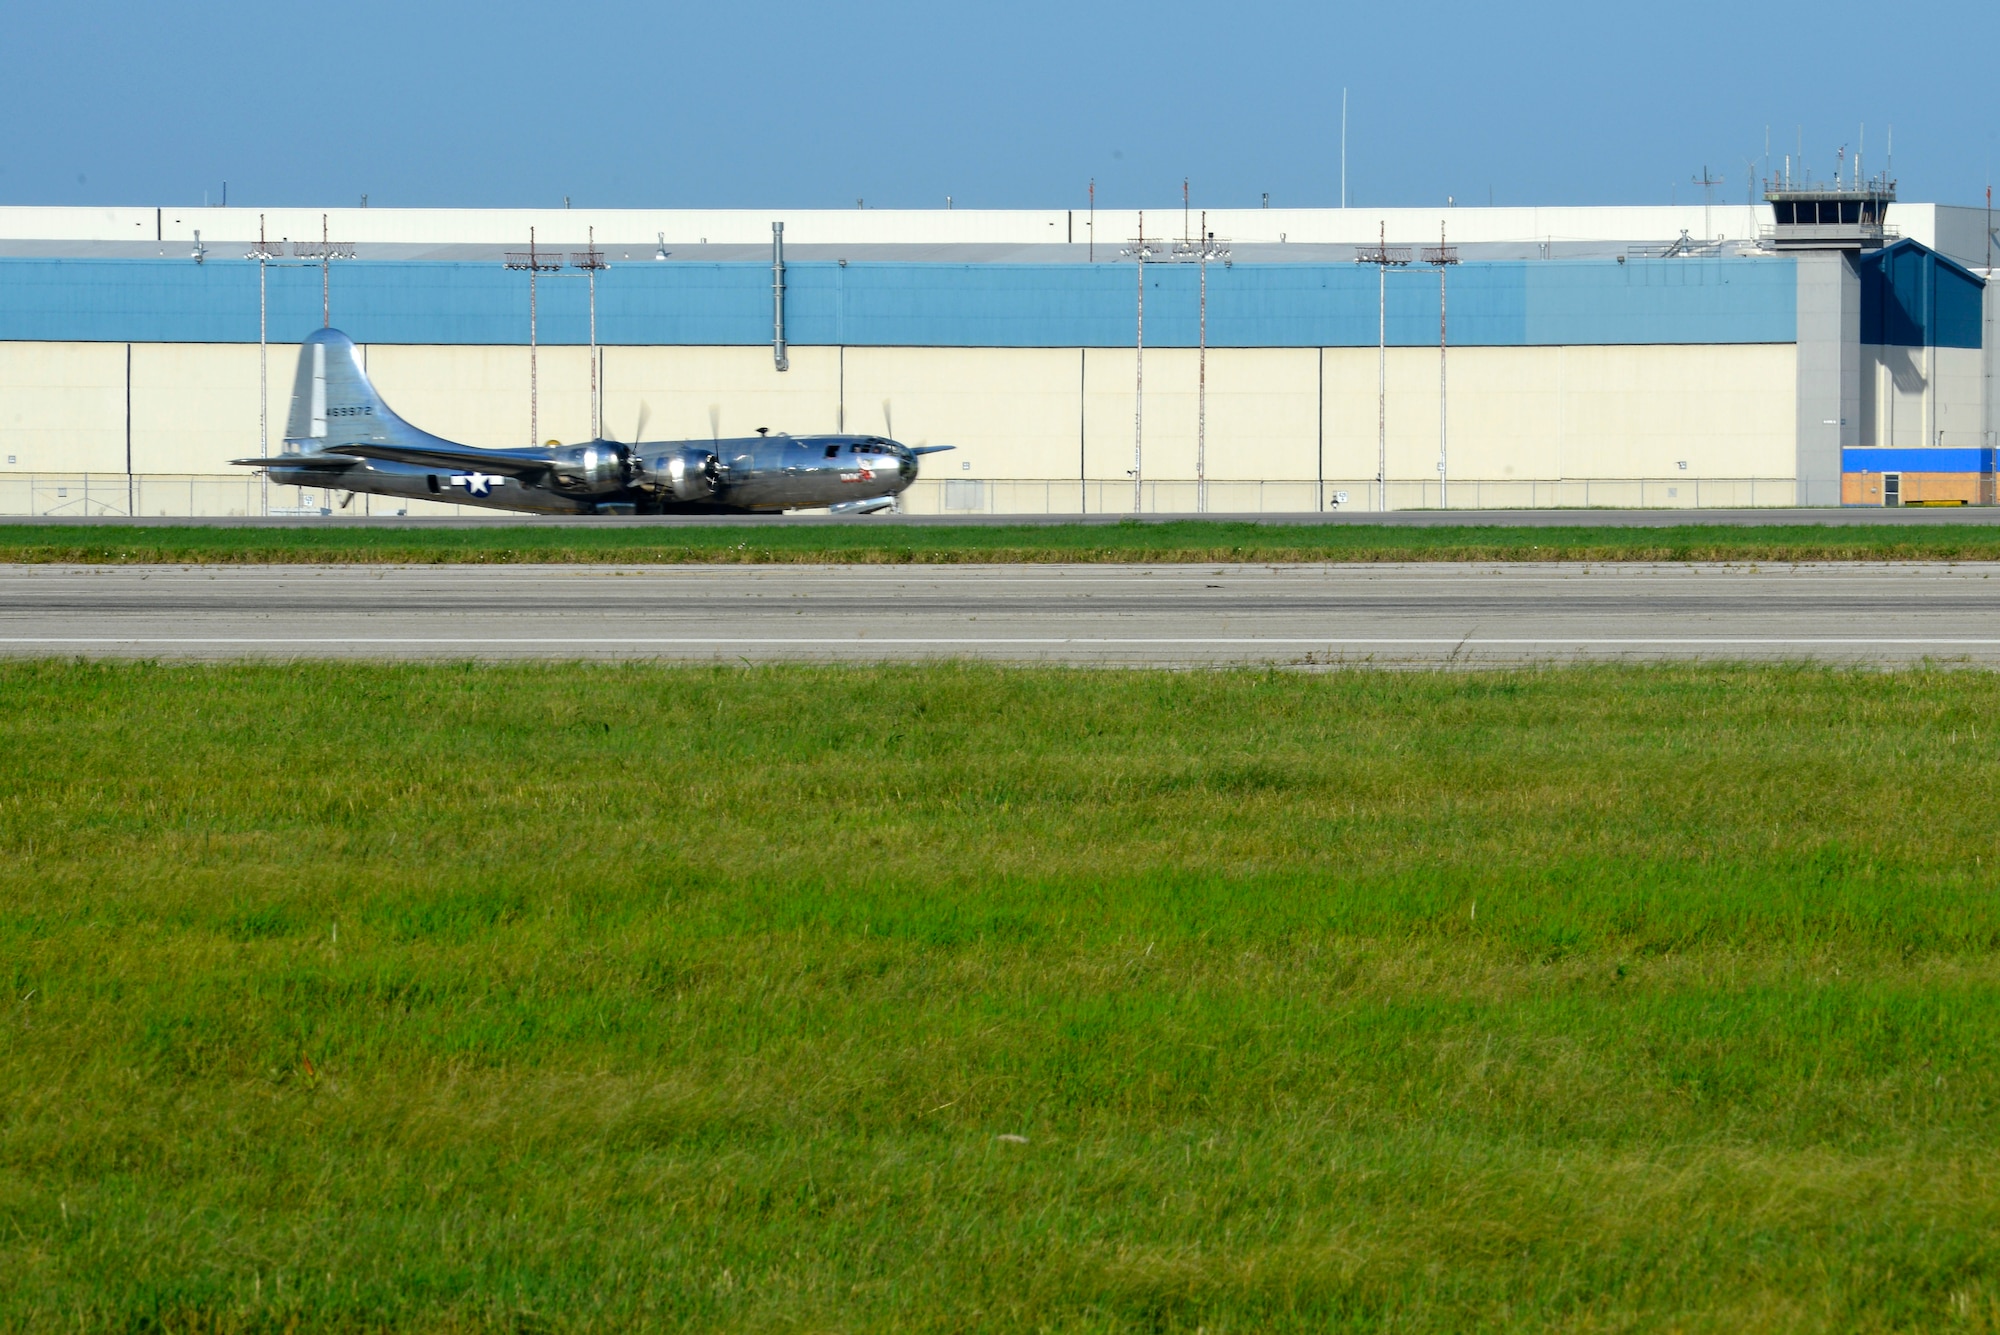 A B-29 Superfortress, known as ‘Doc,’ taxis before takeoff for its first flight in approximately 60 years, July 17, 2016, at McConnell Air Force Base, Kan.  Hundreds of people gathered on and around McConnell AFB to watch this historic flight. (U.S Air Force photo/Senior Airman Trevor Rhynes)